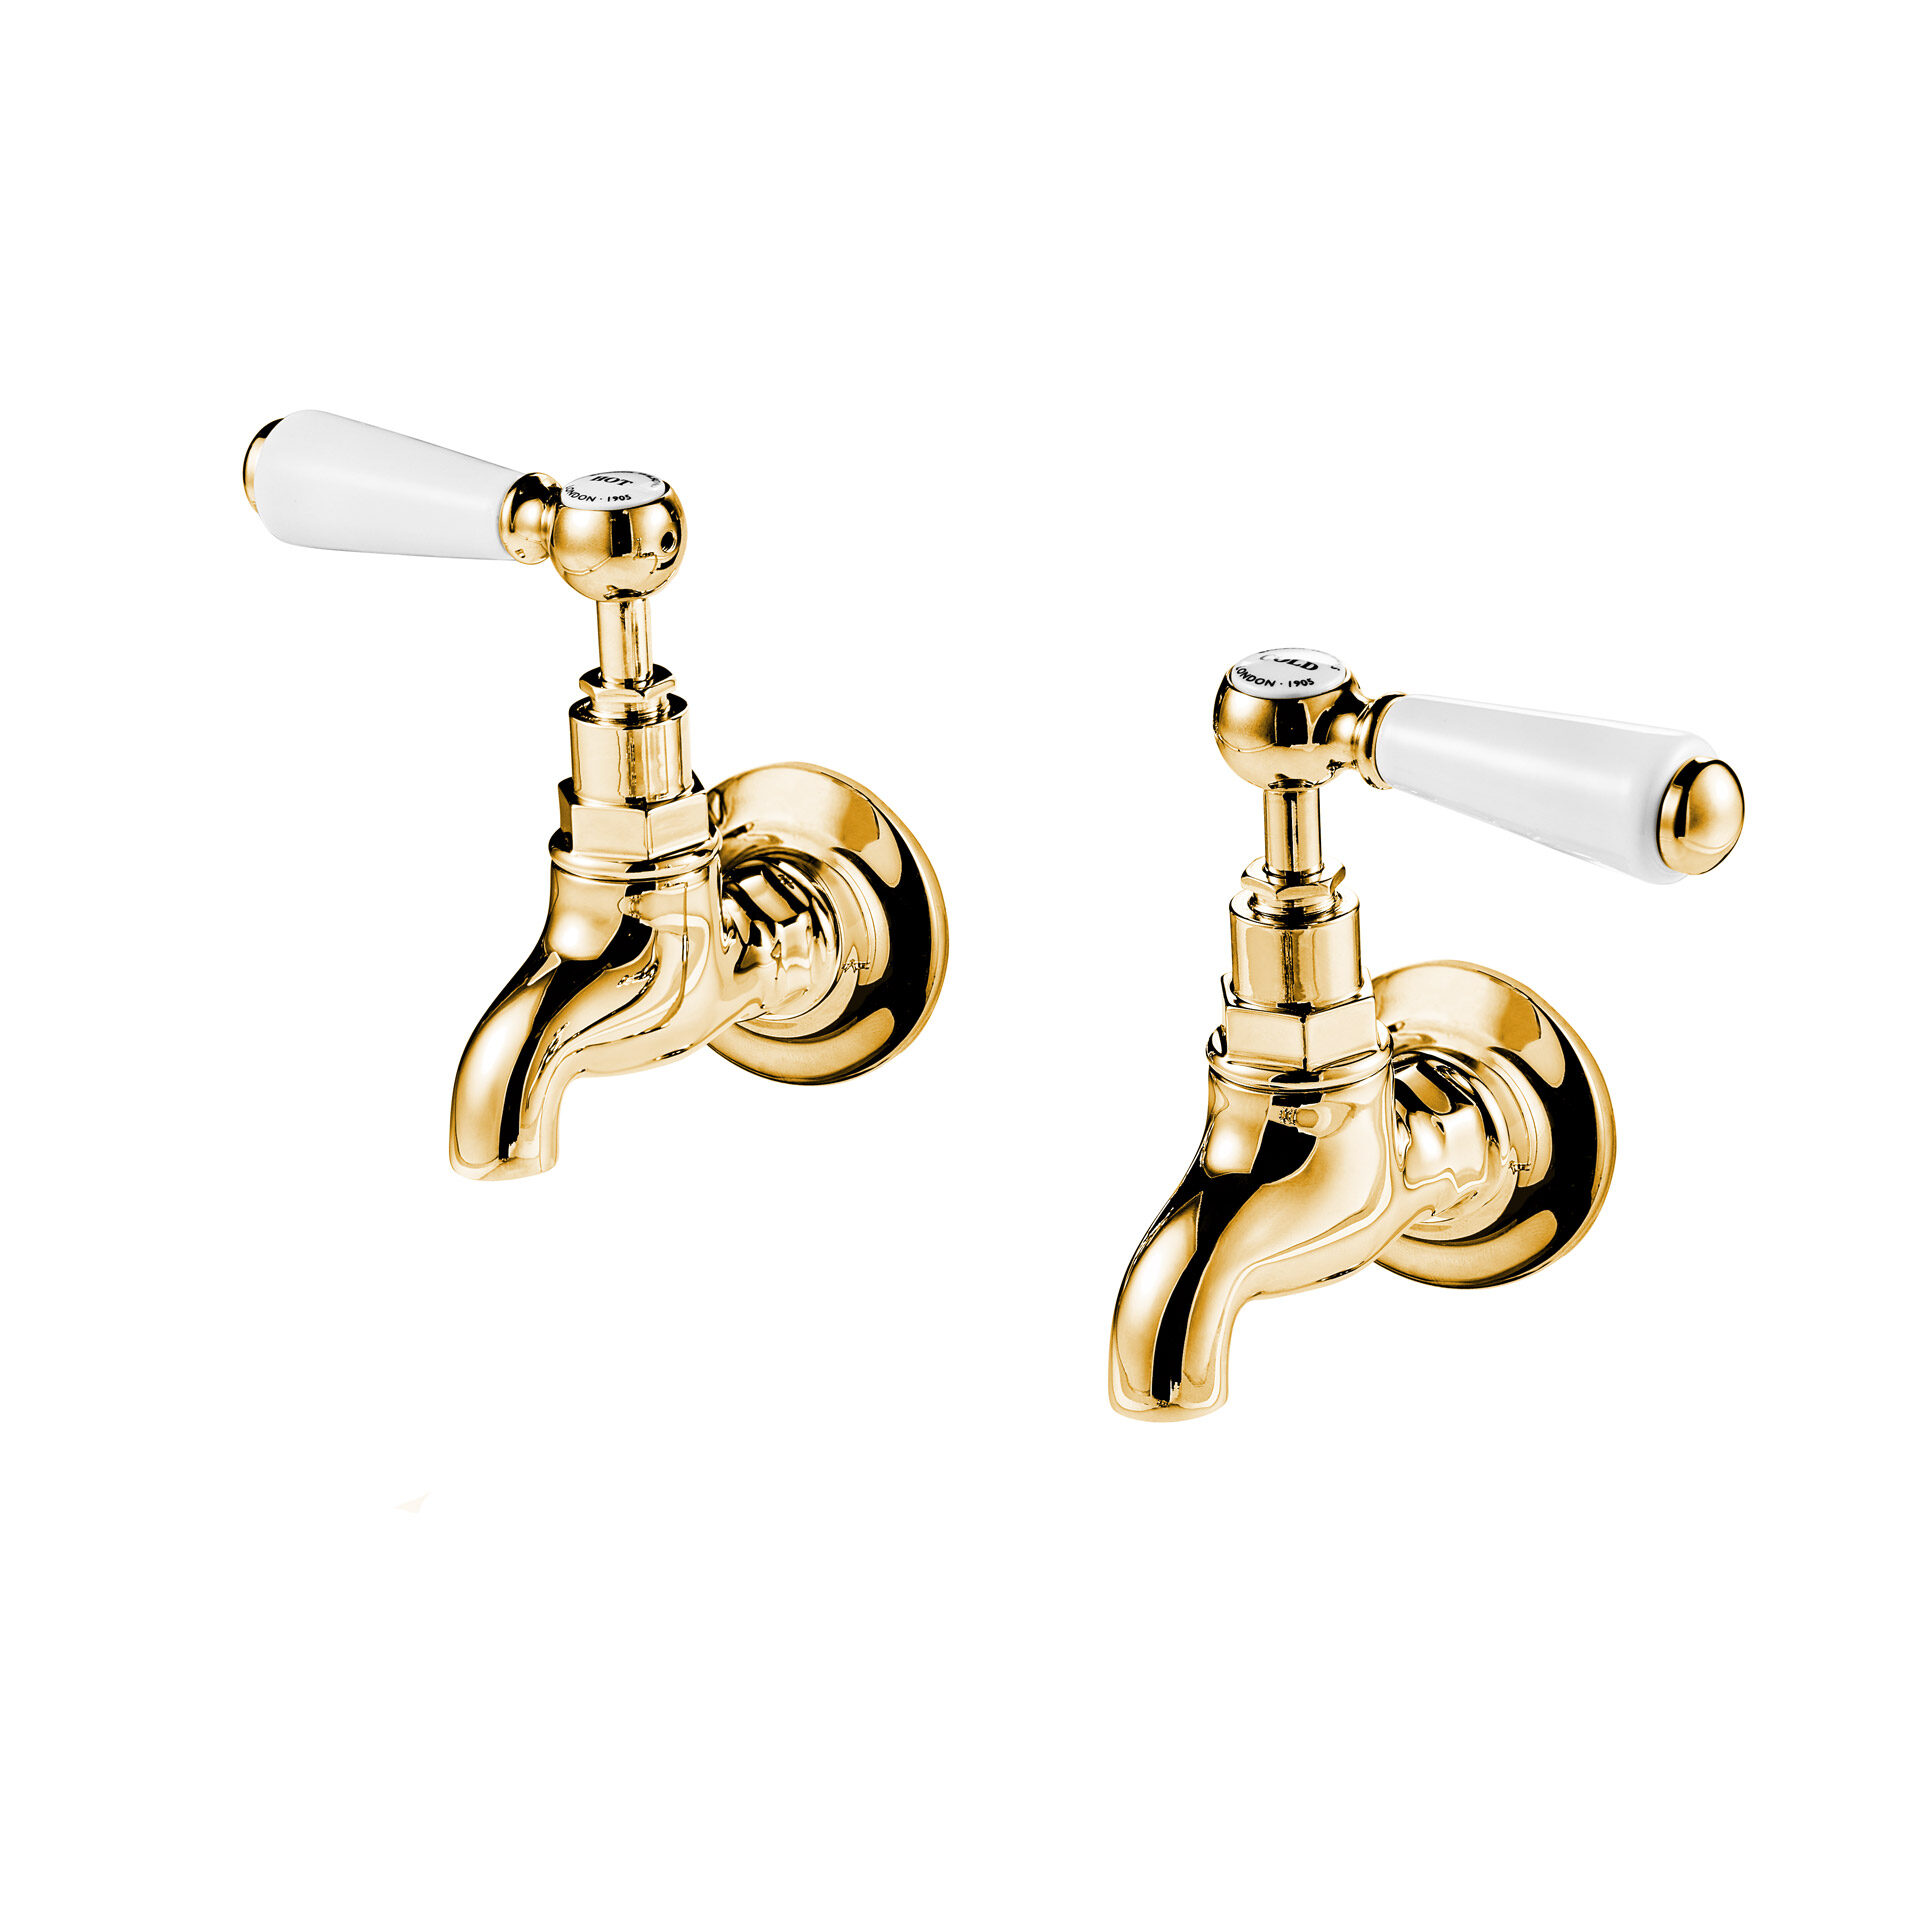 1900’s style wall mounted bib taps with ceramic lever handle in polished brass